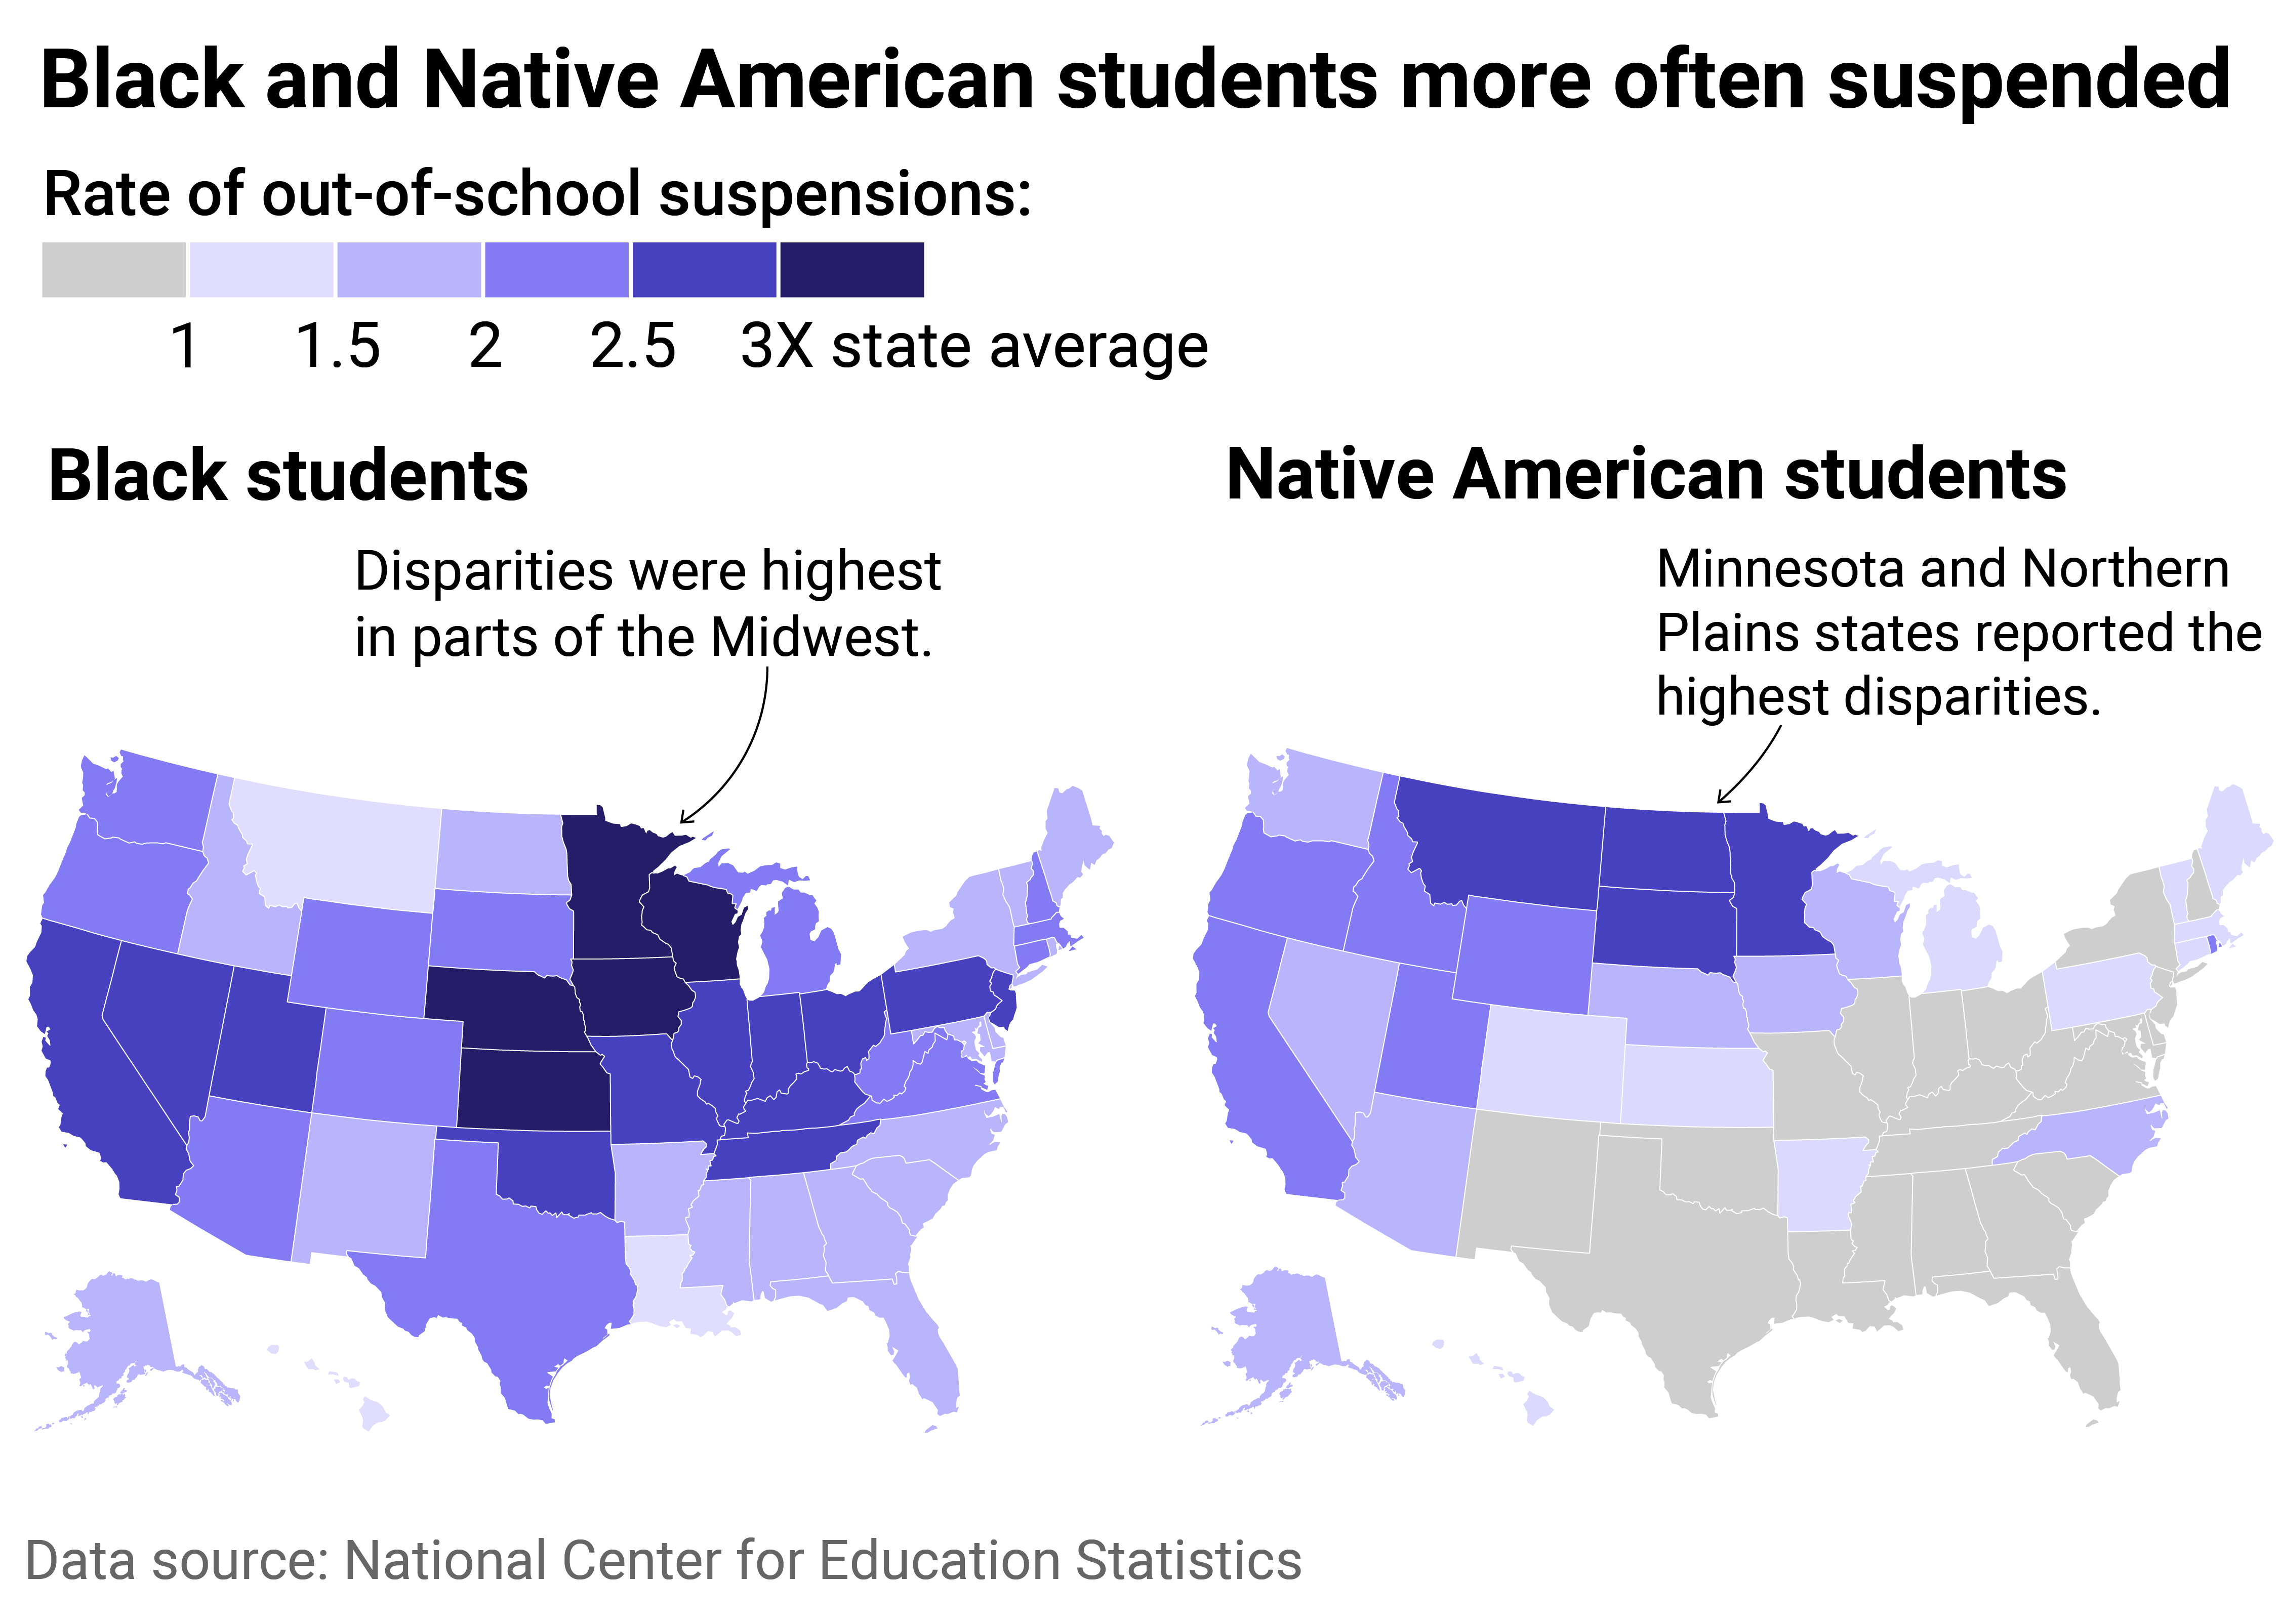 State map showing every state reported higher suspension rates for Black students compared to the state average. Disparities were highest in parts of the Midwest. For Native American students, 28 states reported higher suspension rates, with Minnesota and Northern Plains States reporting the worst disparities.